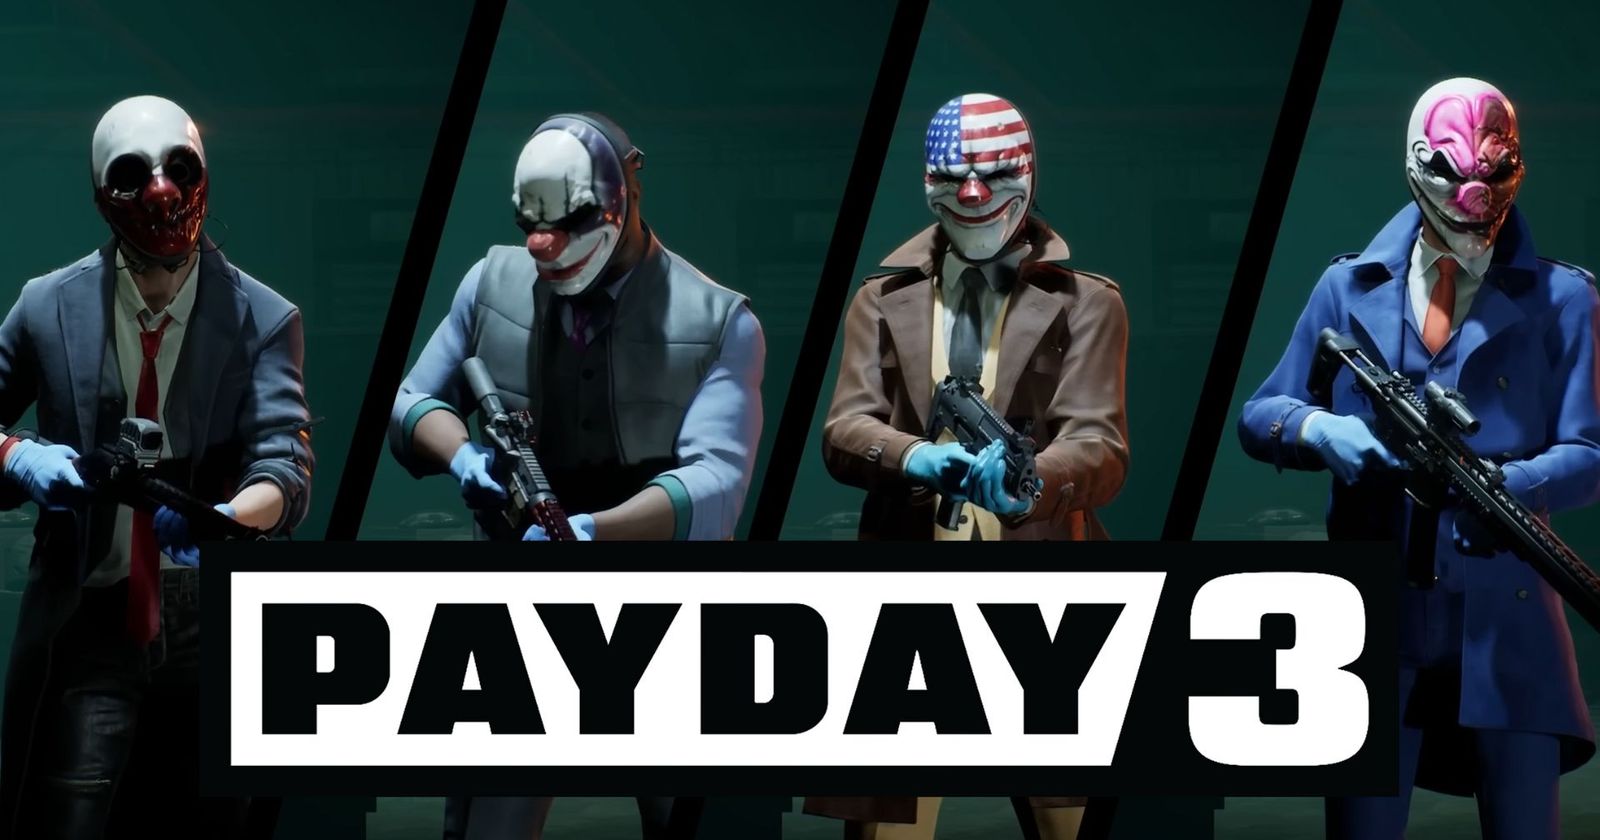 Payday 3 always online confirmation met with dismay from fans